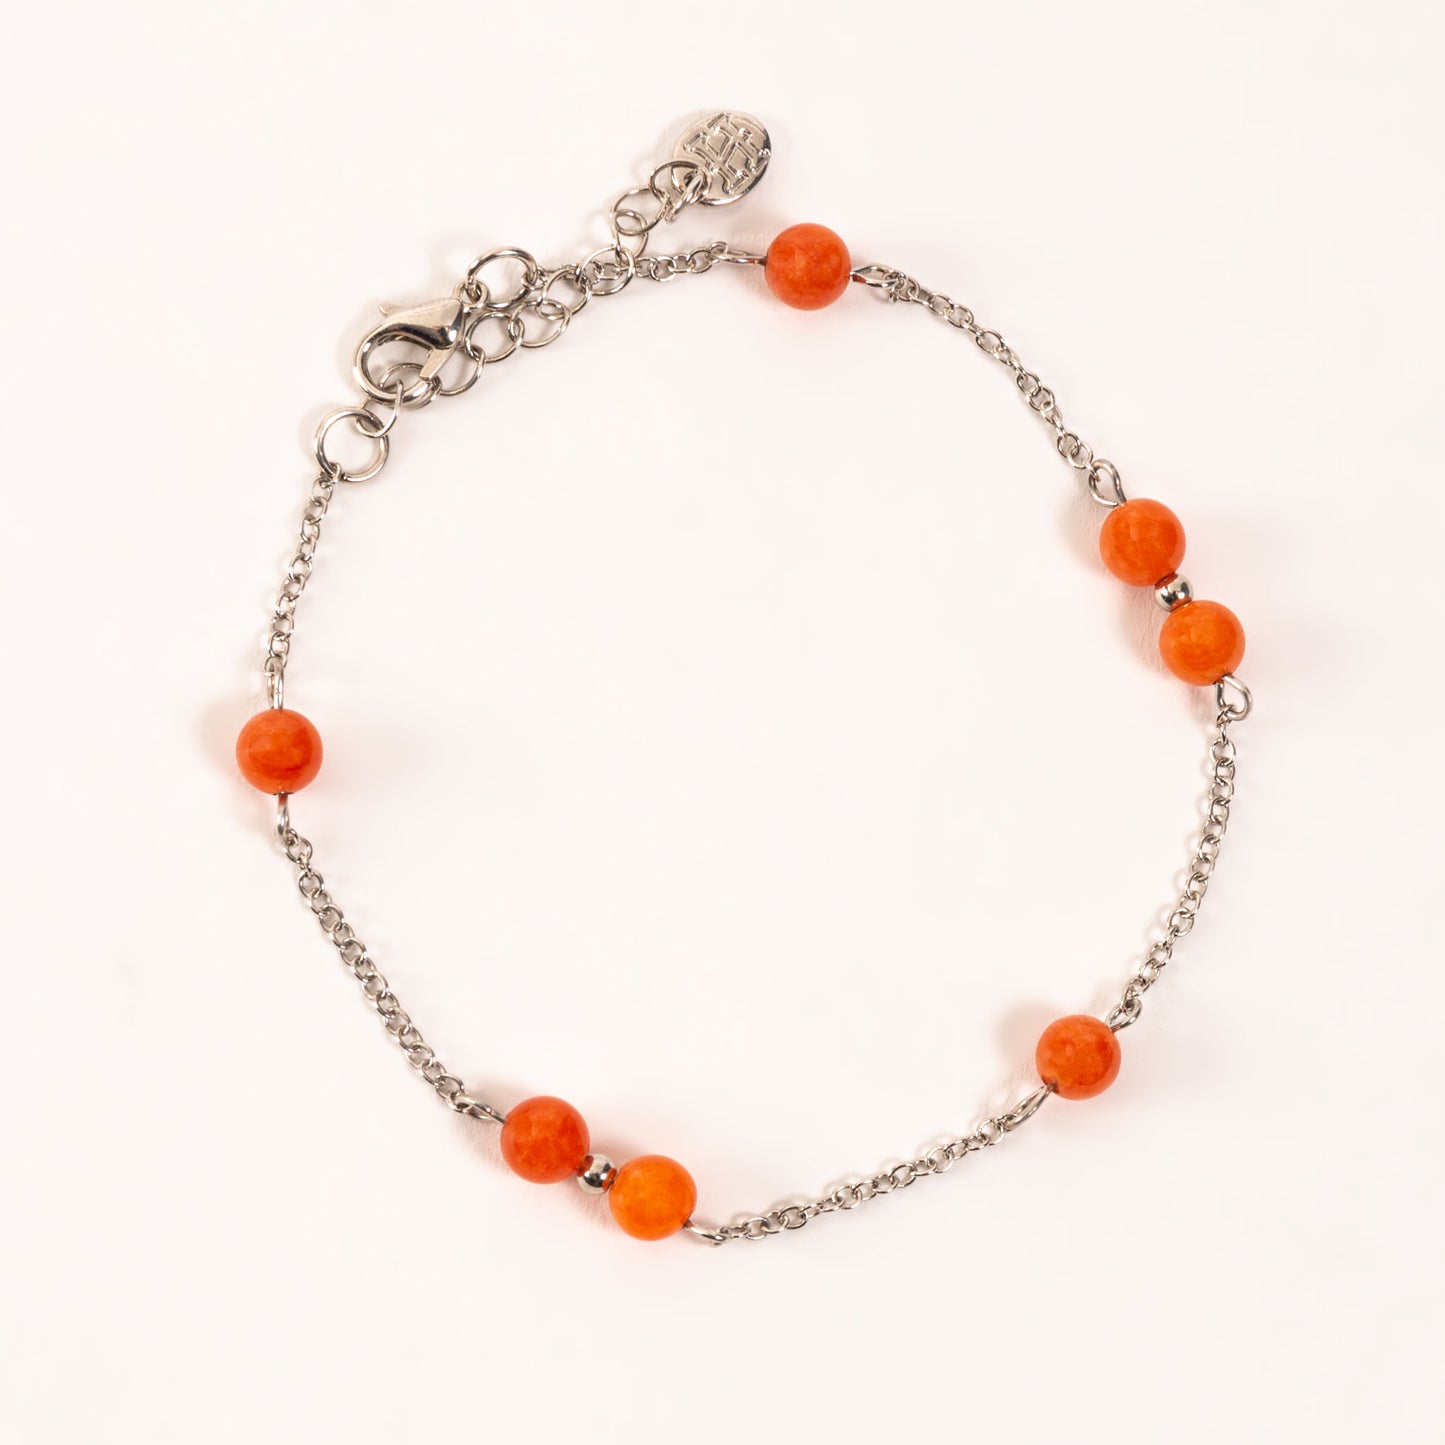 Alexis Coral Bead Silver Chain Anklet